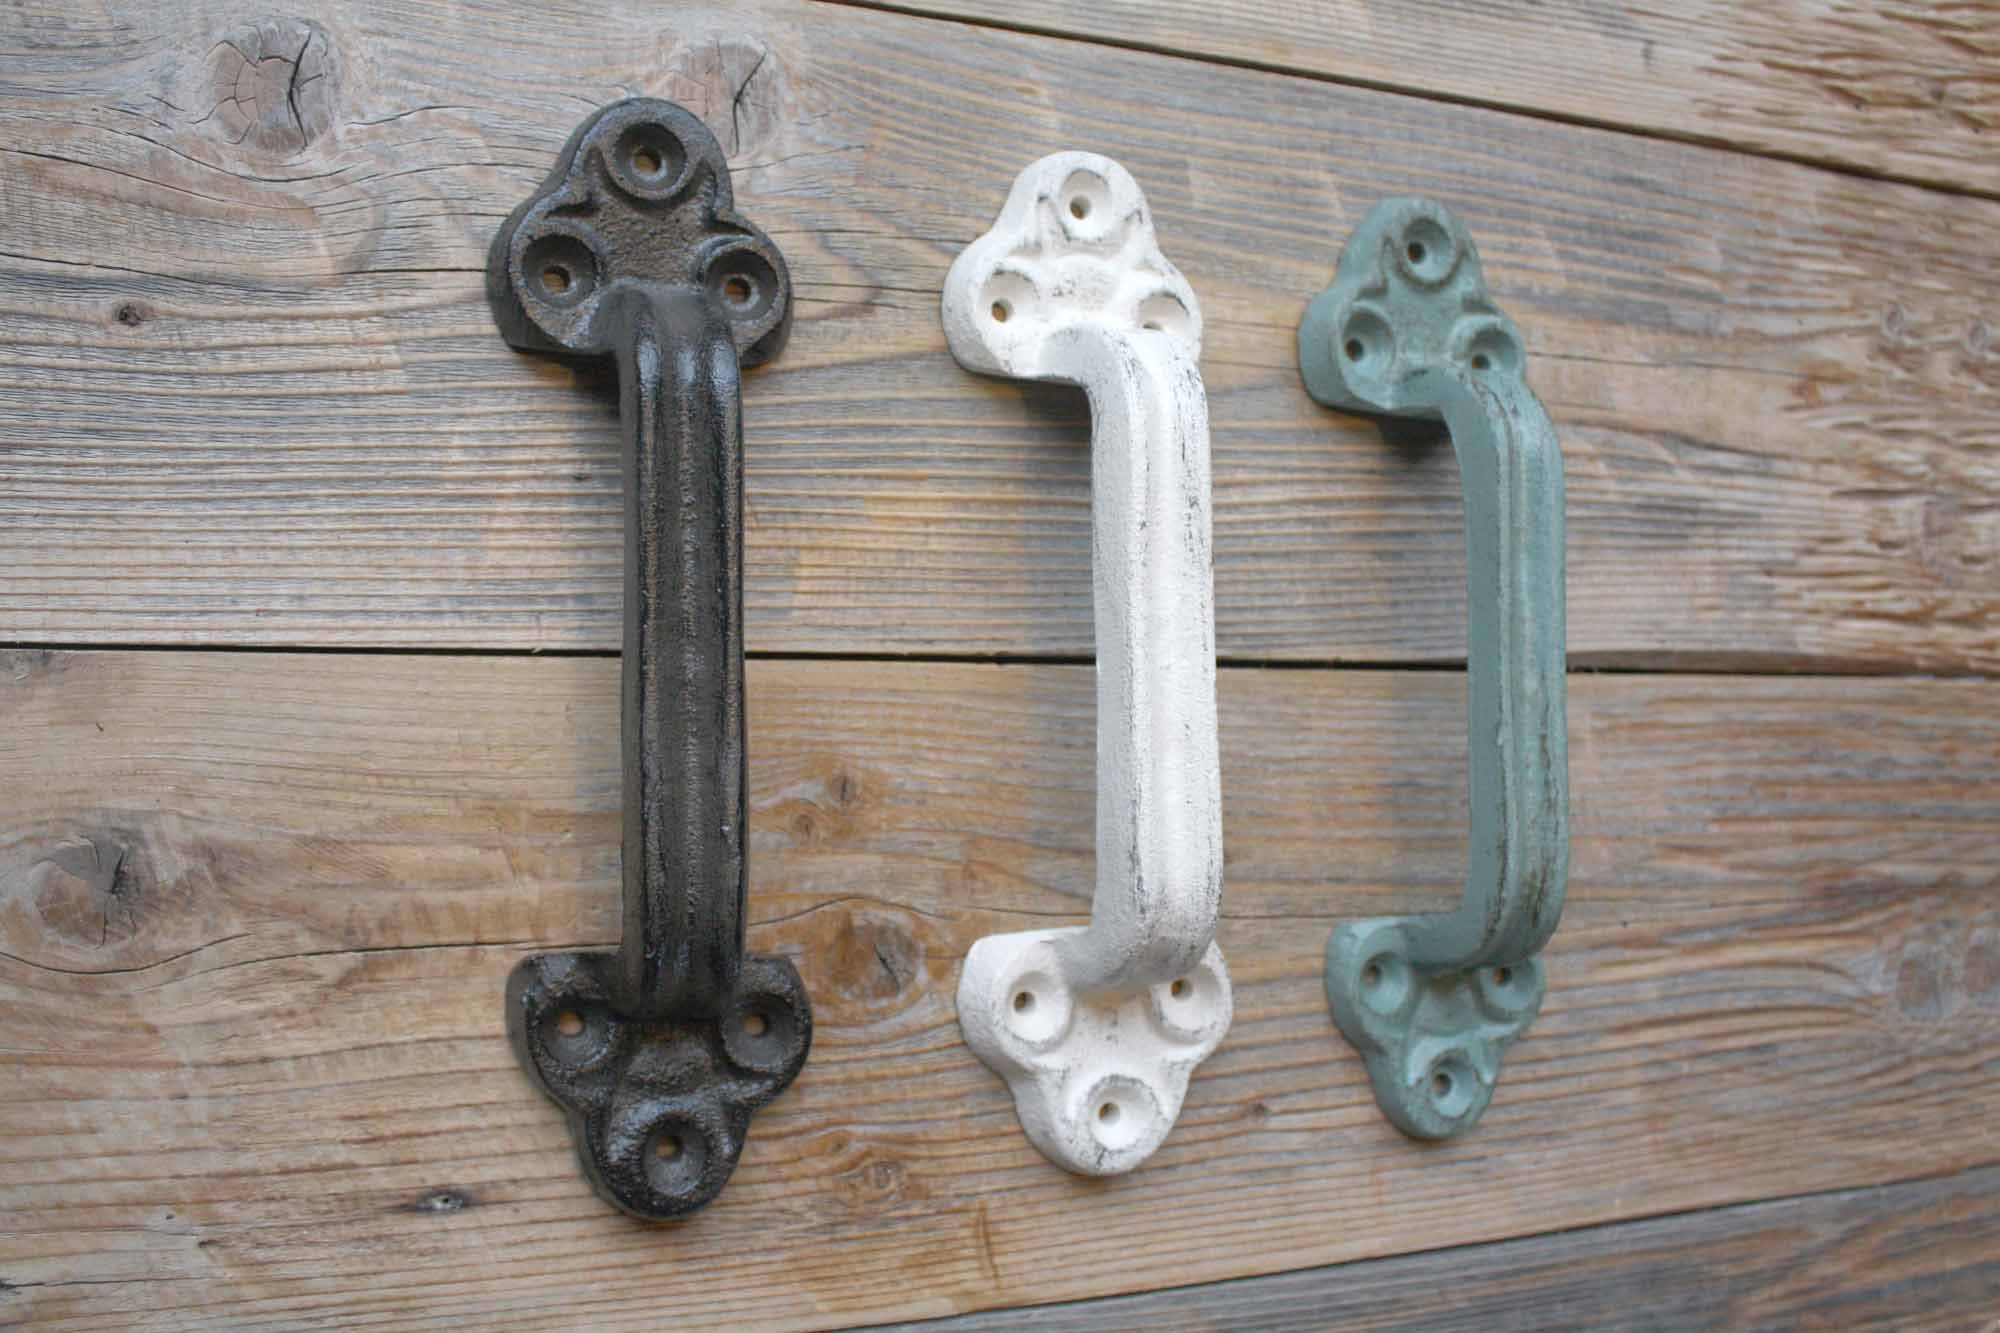 Lot of 6 Cast Iron Gate Shed Barn Door Pull Handle 9" Large & Sturdy 0170-05124 